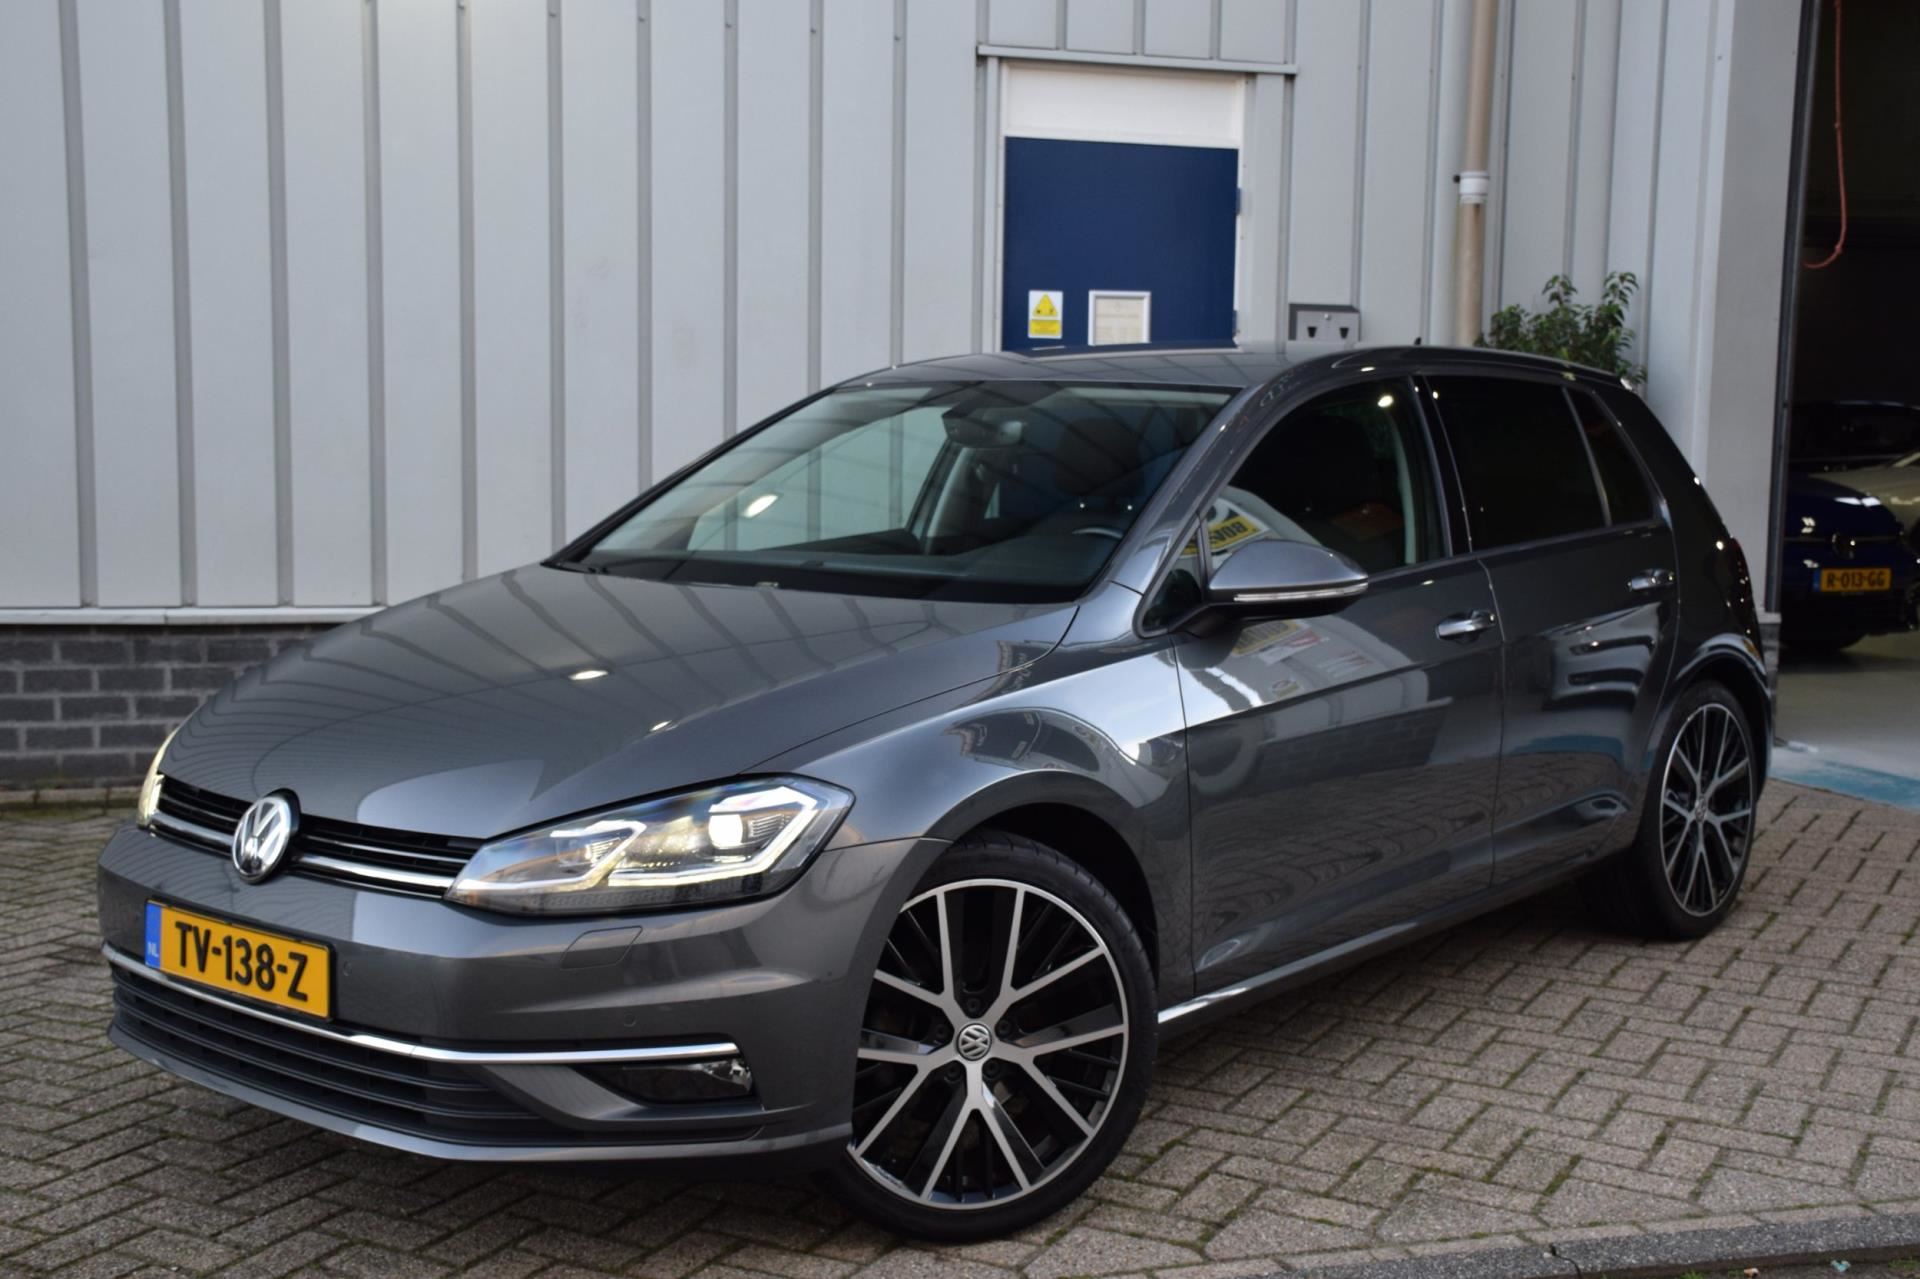 Volkswagen Golf occasion - Used Car Store Almere